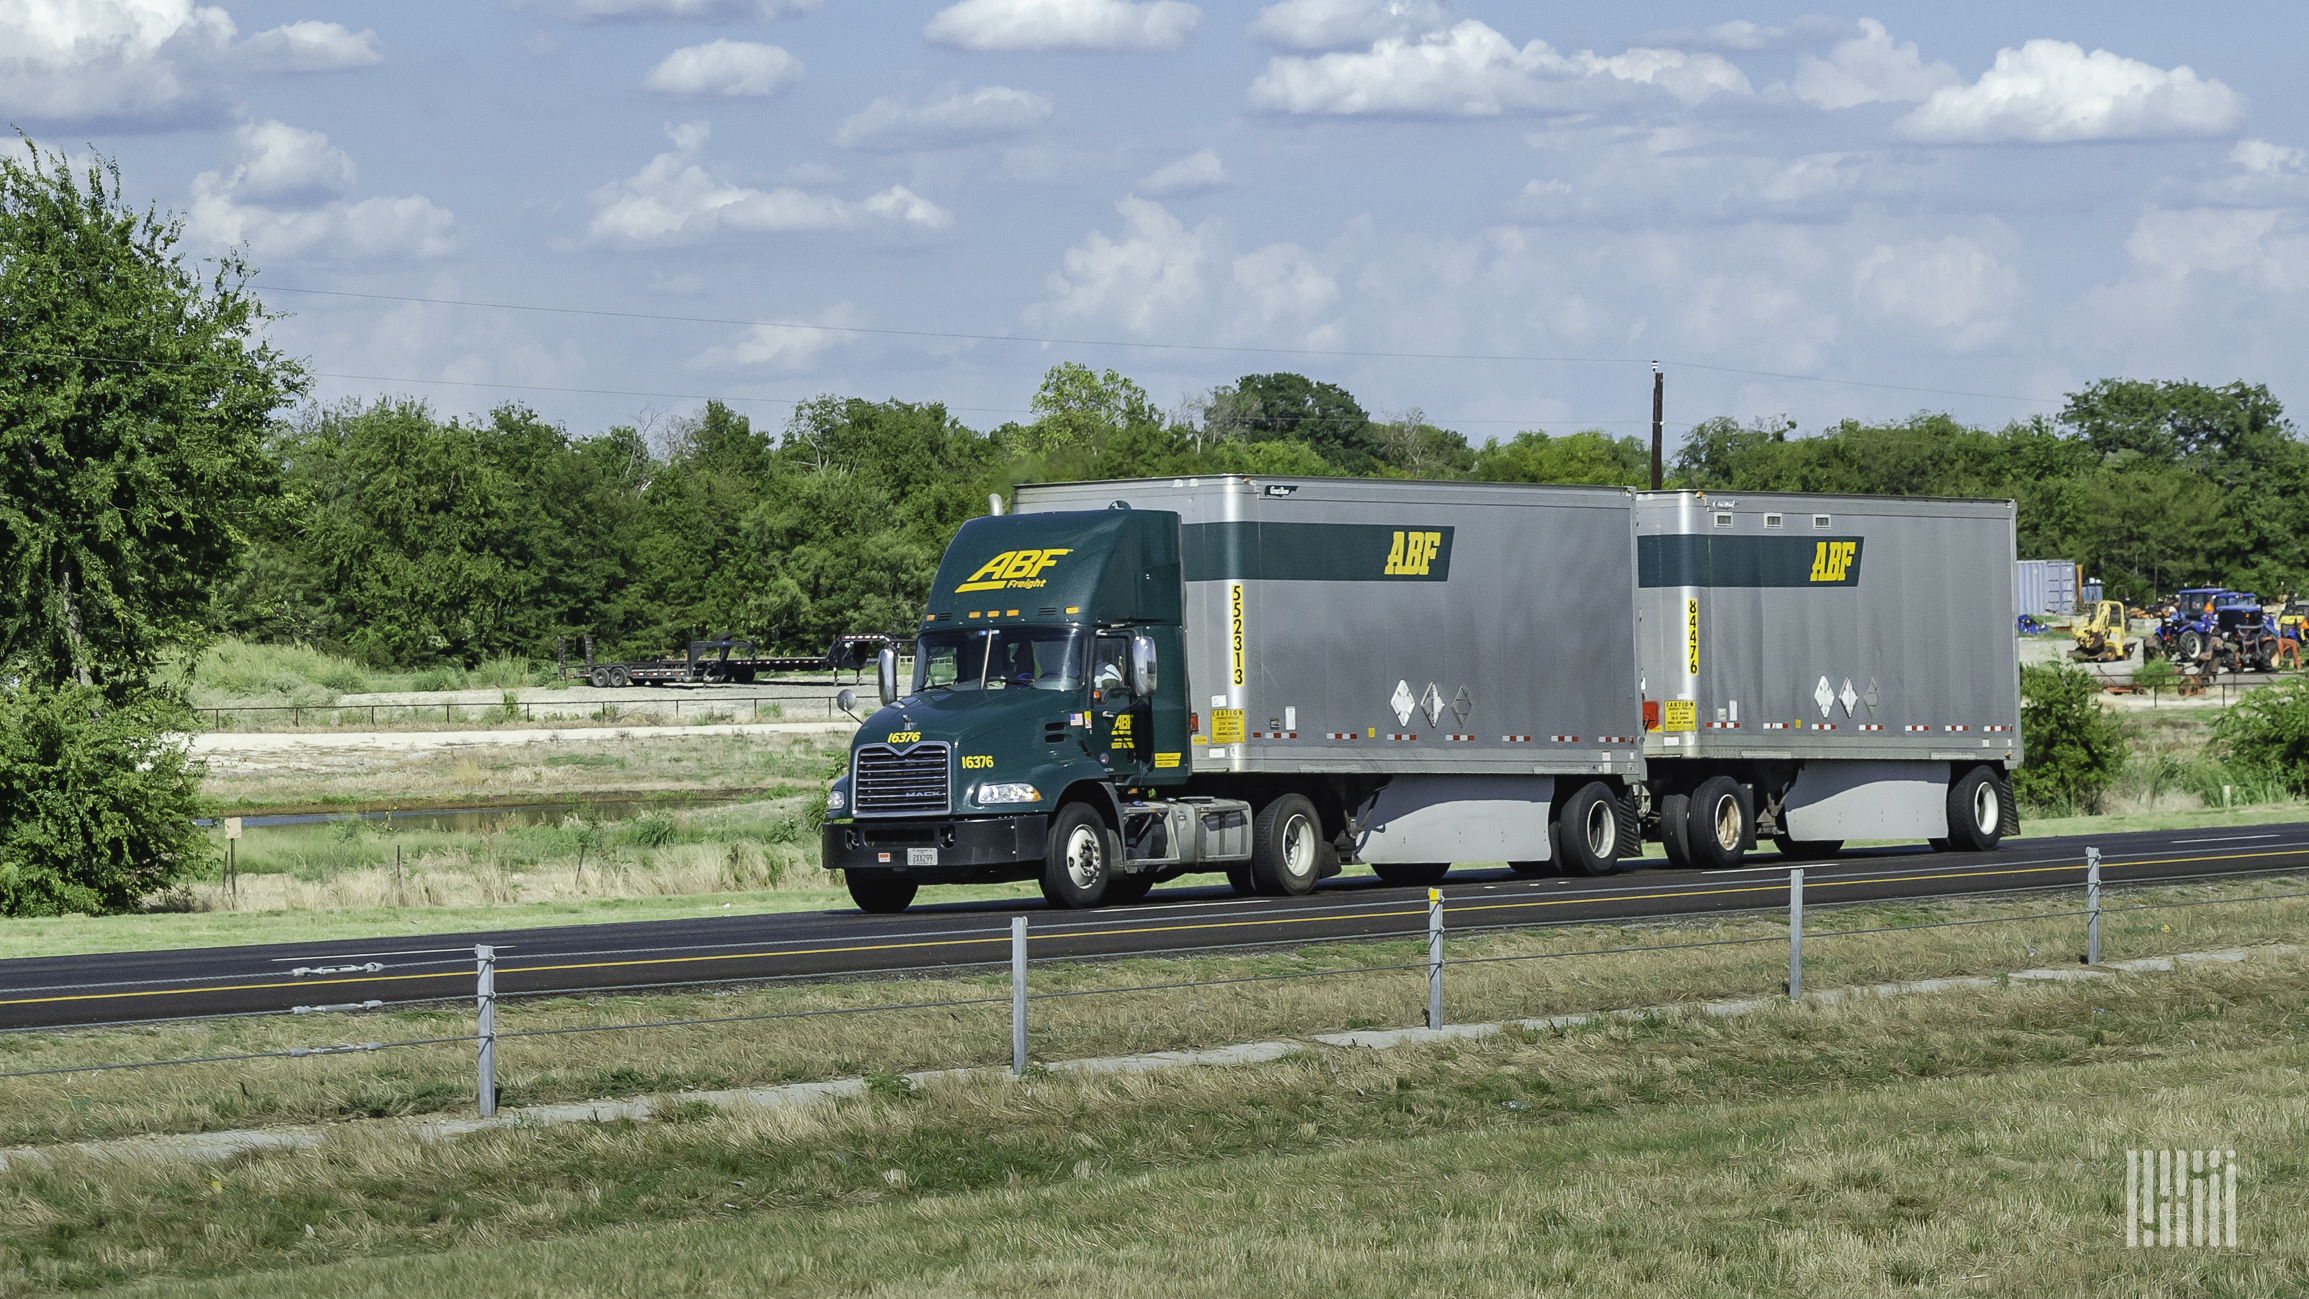 ABF Freight Shipping